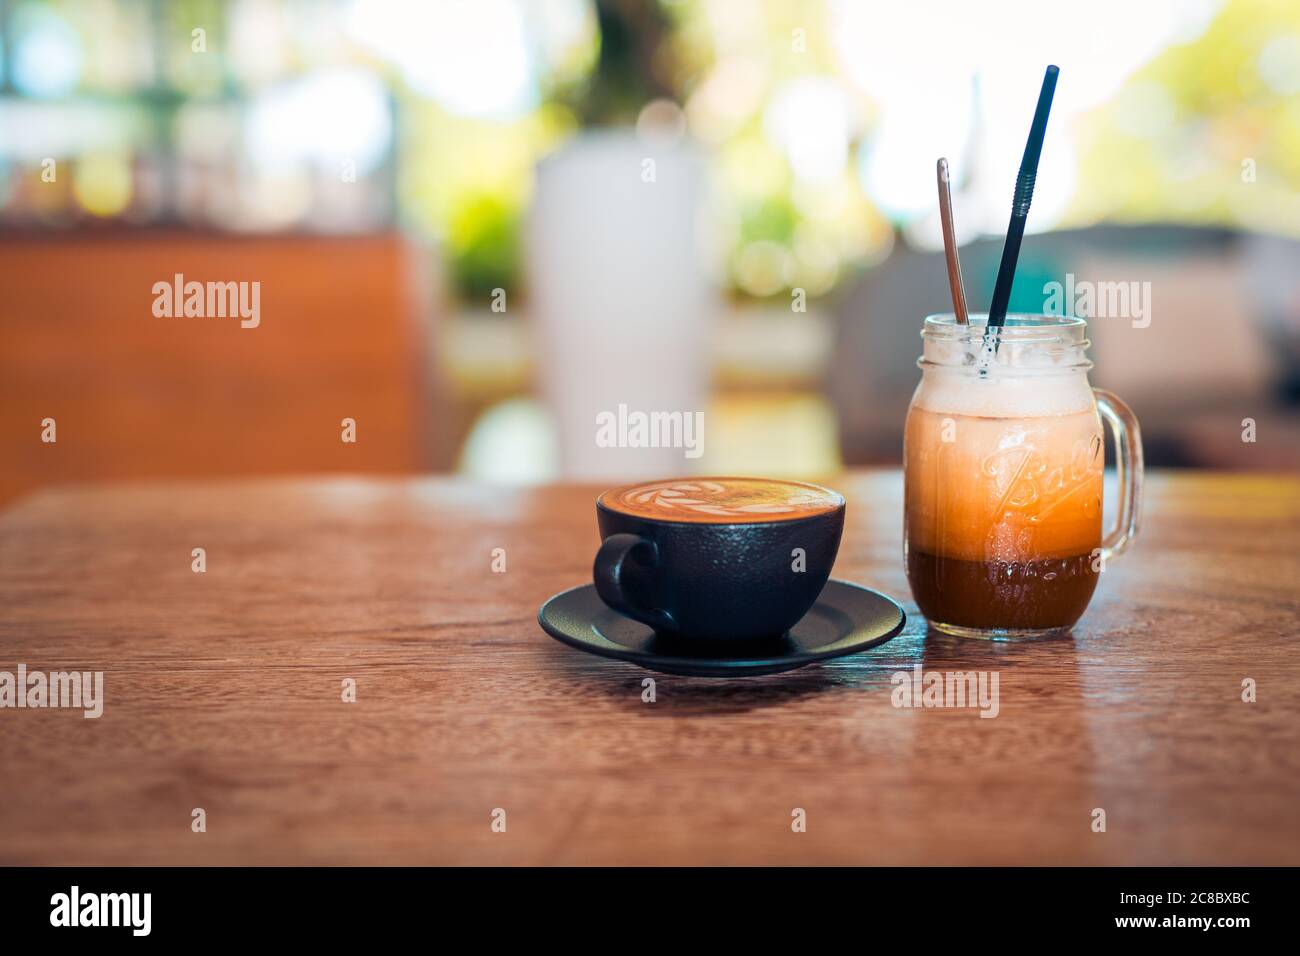 D'Coffee Cup :: ice cafe latte